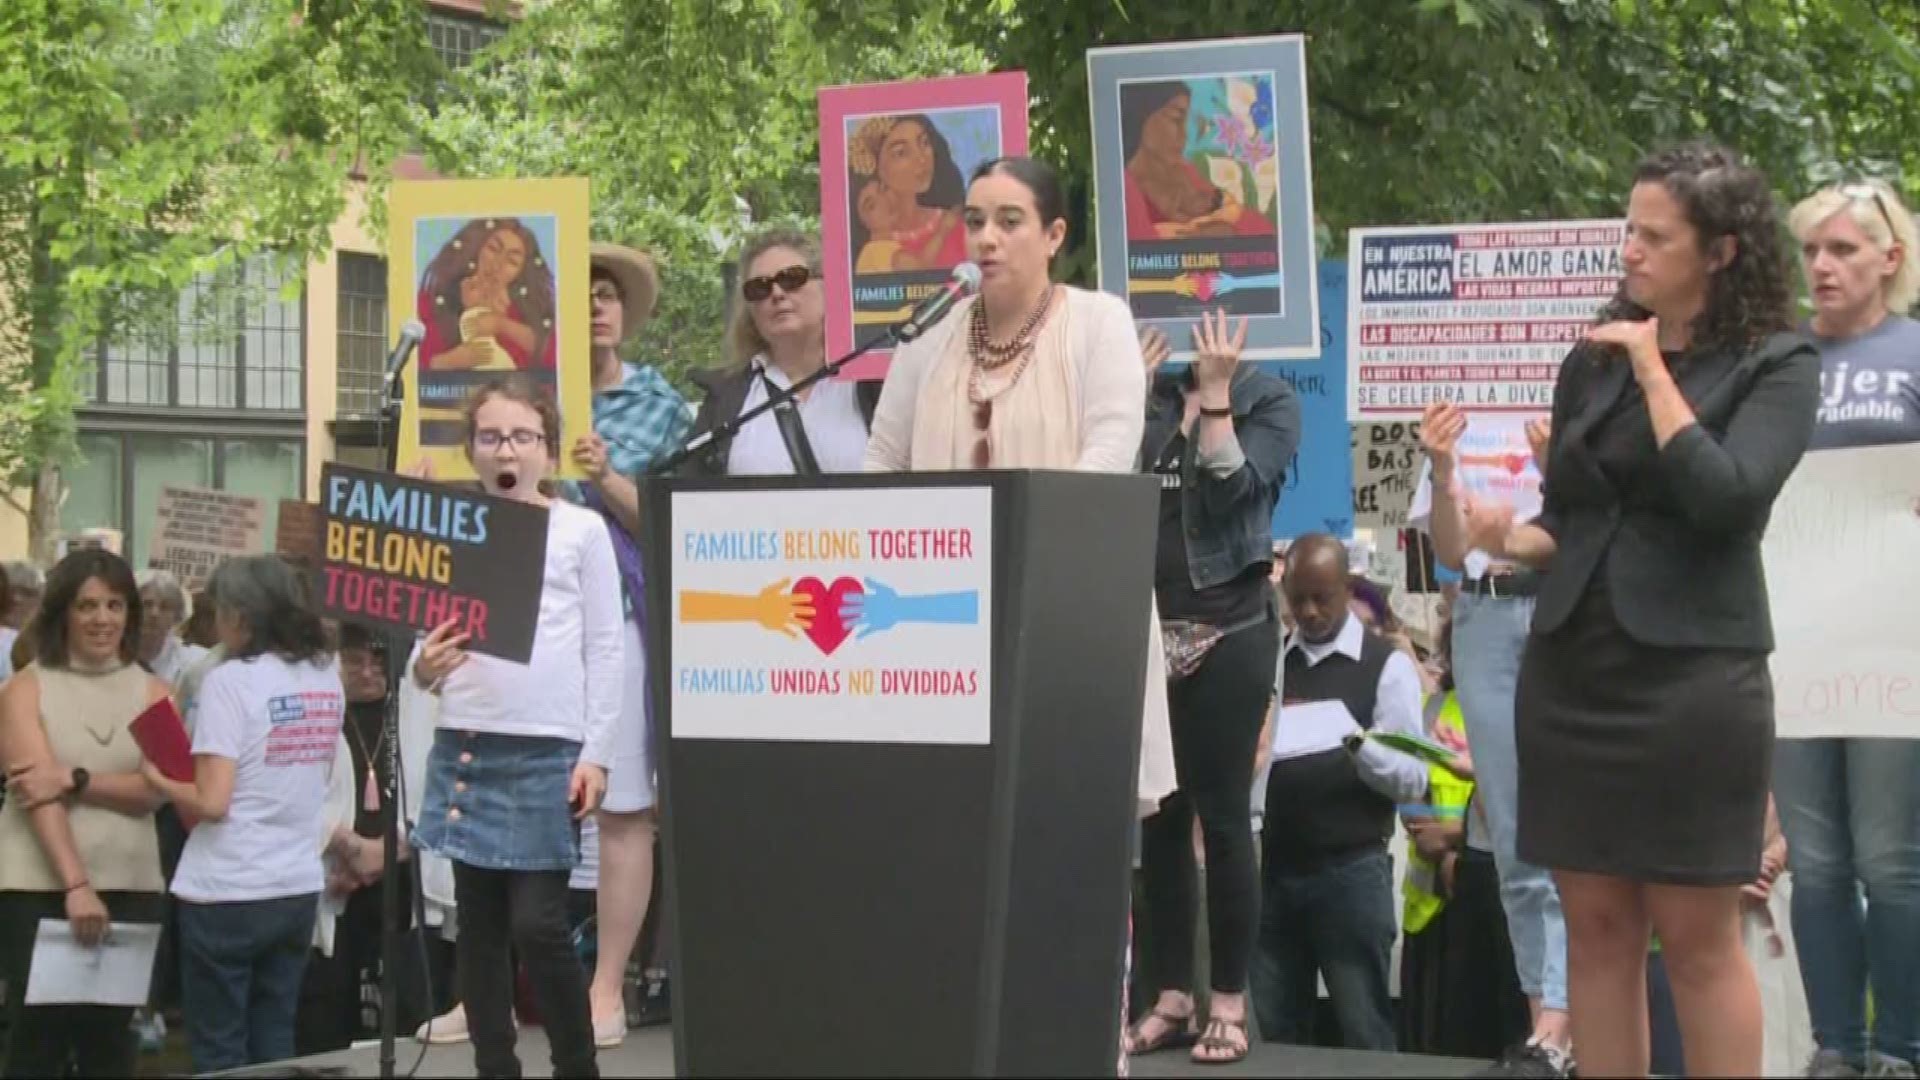 Thousands of demonstrators gathered in Portland and Vancouver Saturday, joining cities across the country to rally against the Trump administration's recent policy of family separations.